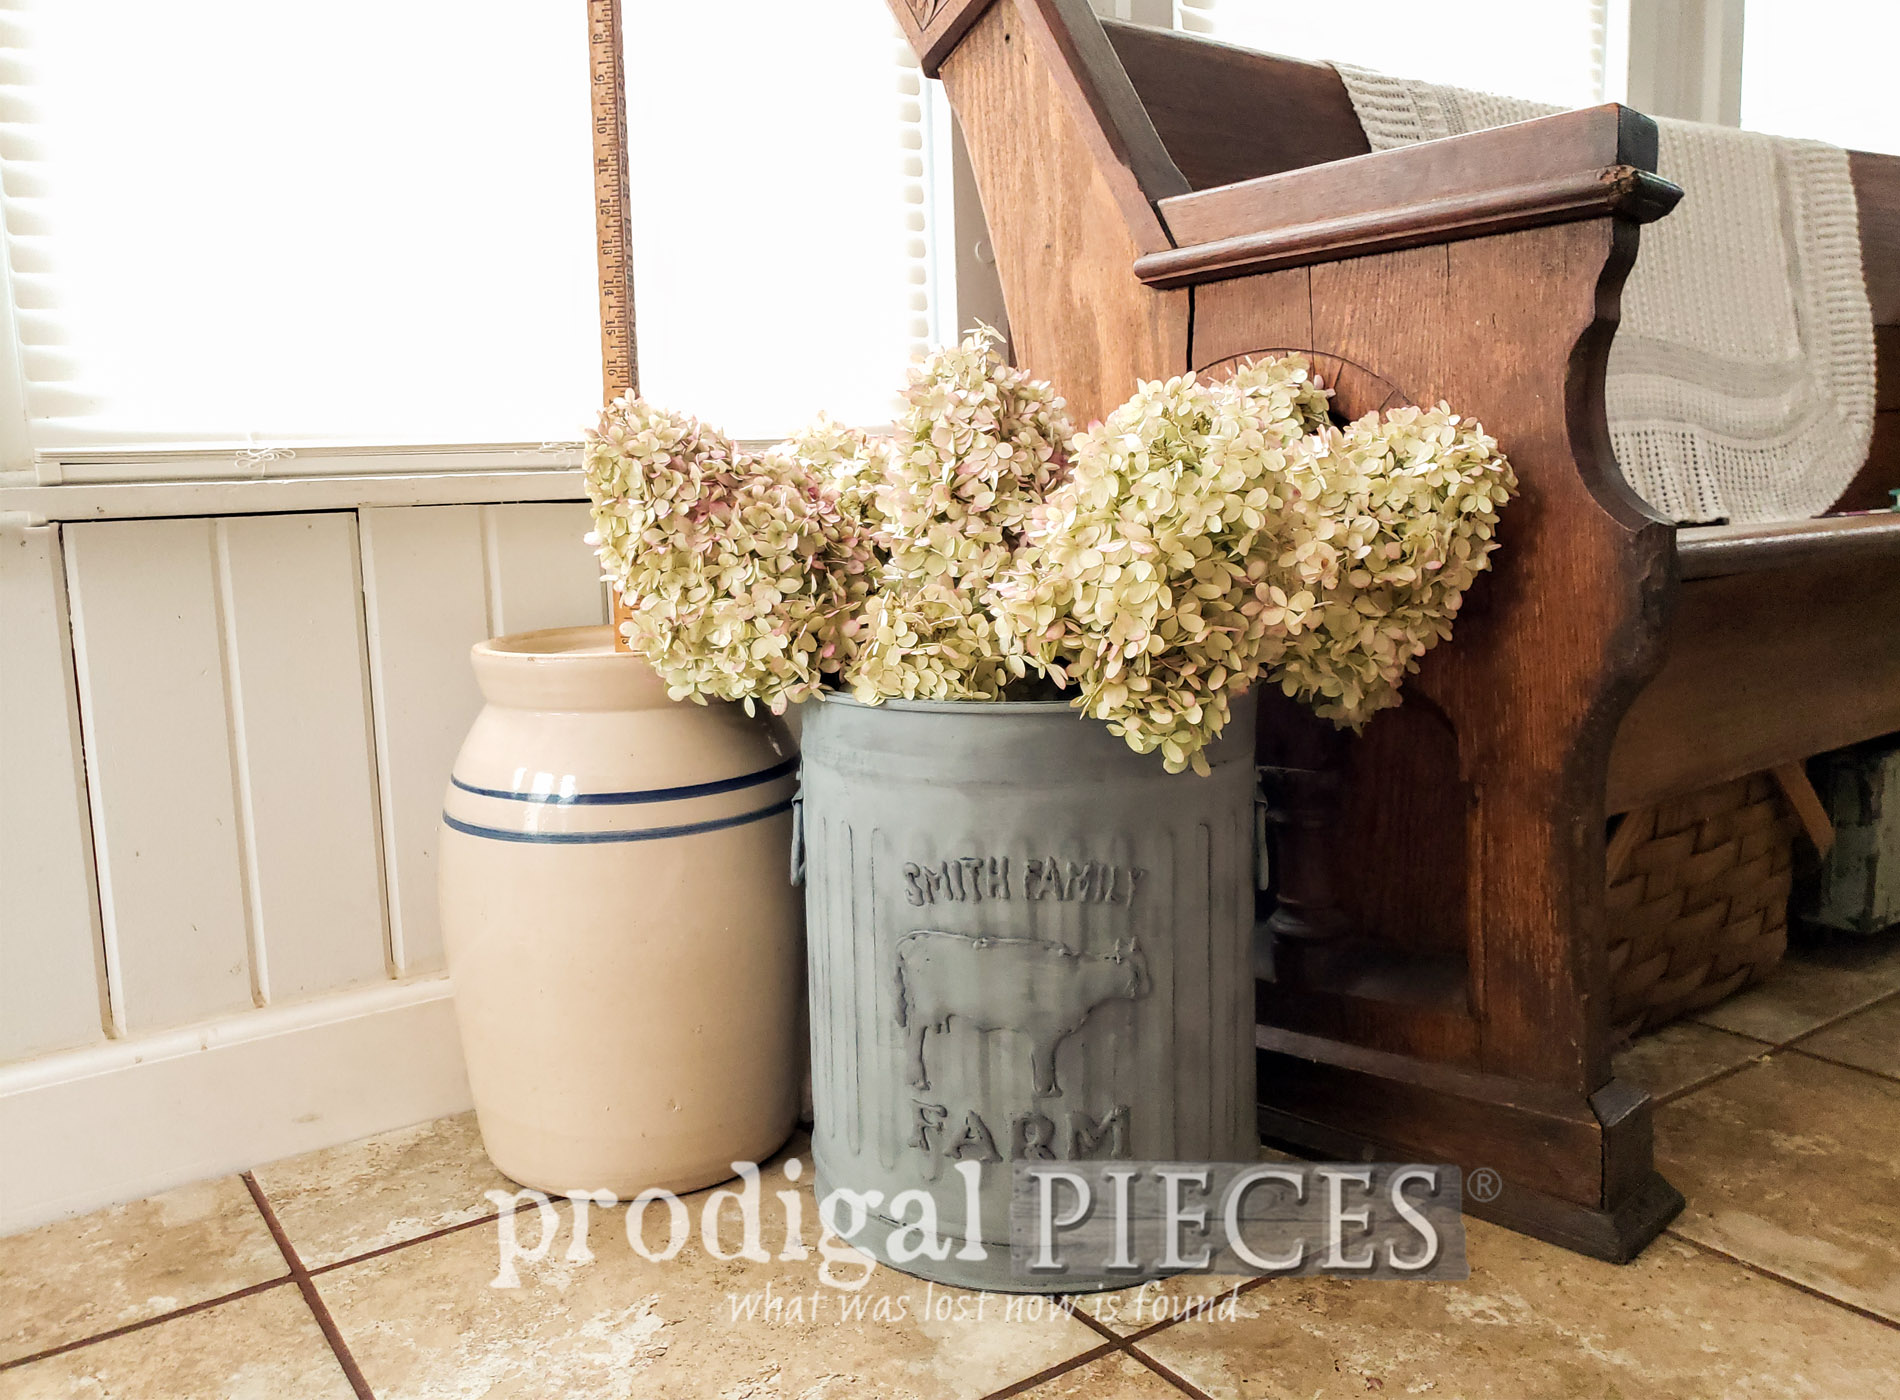 Featured How to Emboss Anything with Video Tutorial by Larissa of Prodigal Pieces | prodigalpieces.com #prodigalpieces #farmhouse #diy #home #homedecor #budgetdecor